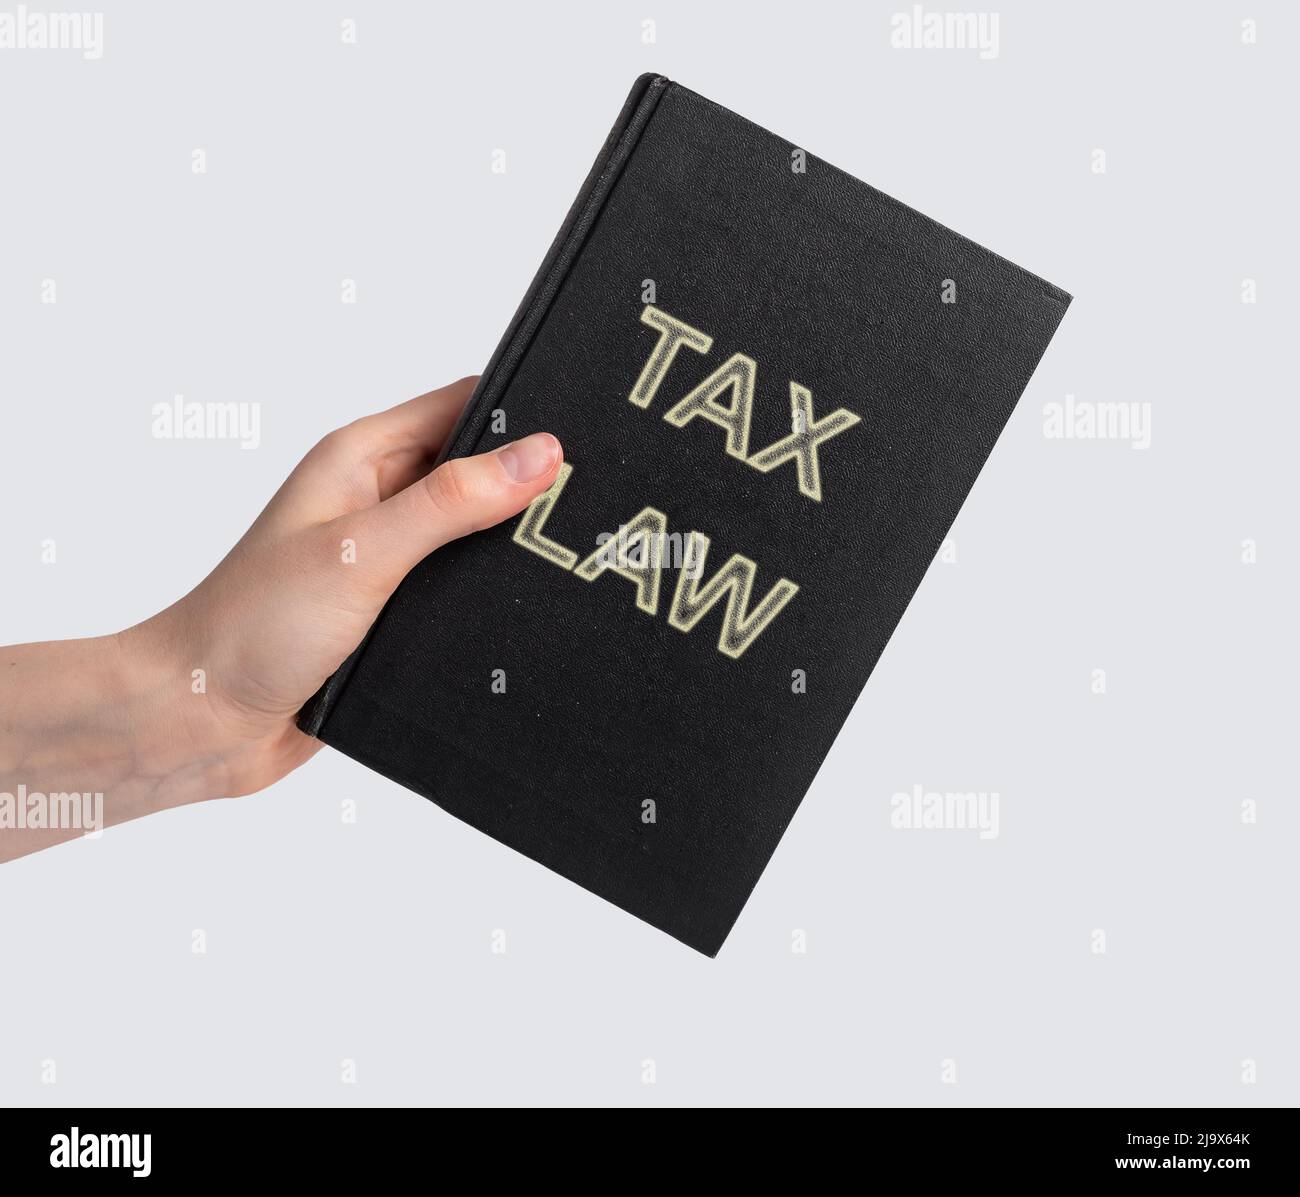 Woman hand with tax law book. Revenue legislation, study of rules to assess and collect levies concept. Code, legal dictionary, guide. Education for becoming lawyer. Literature. photo Stock Photo